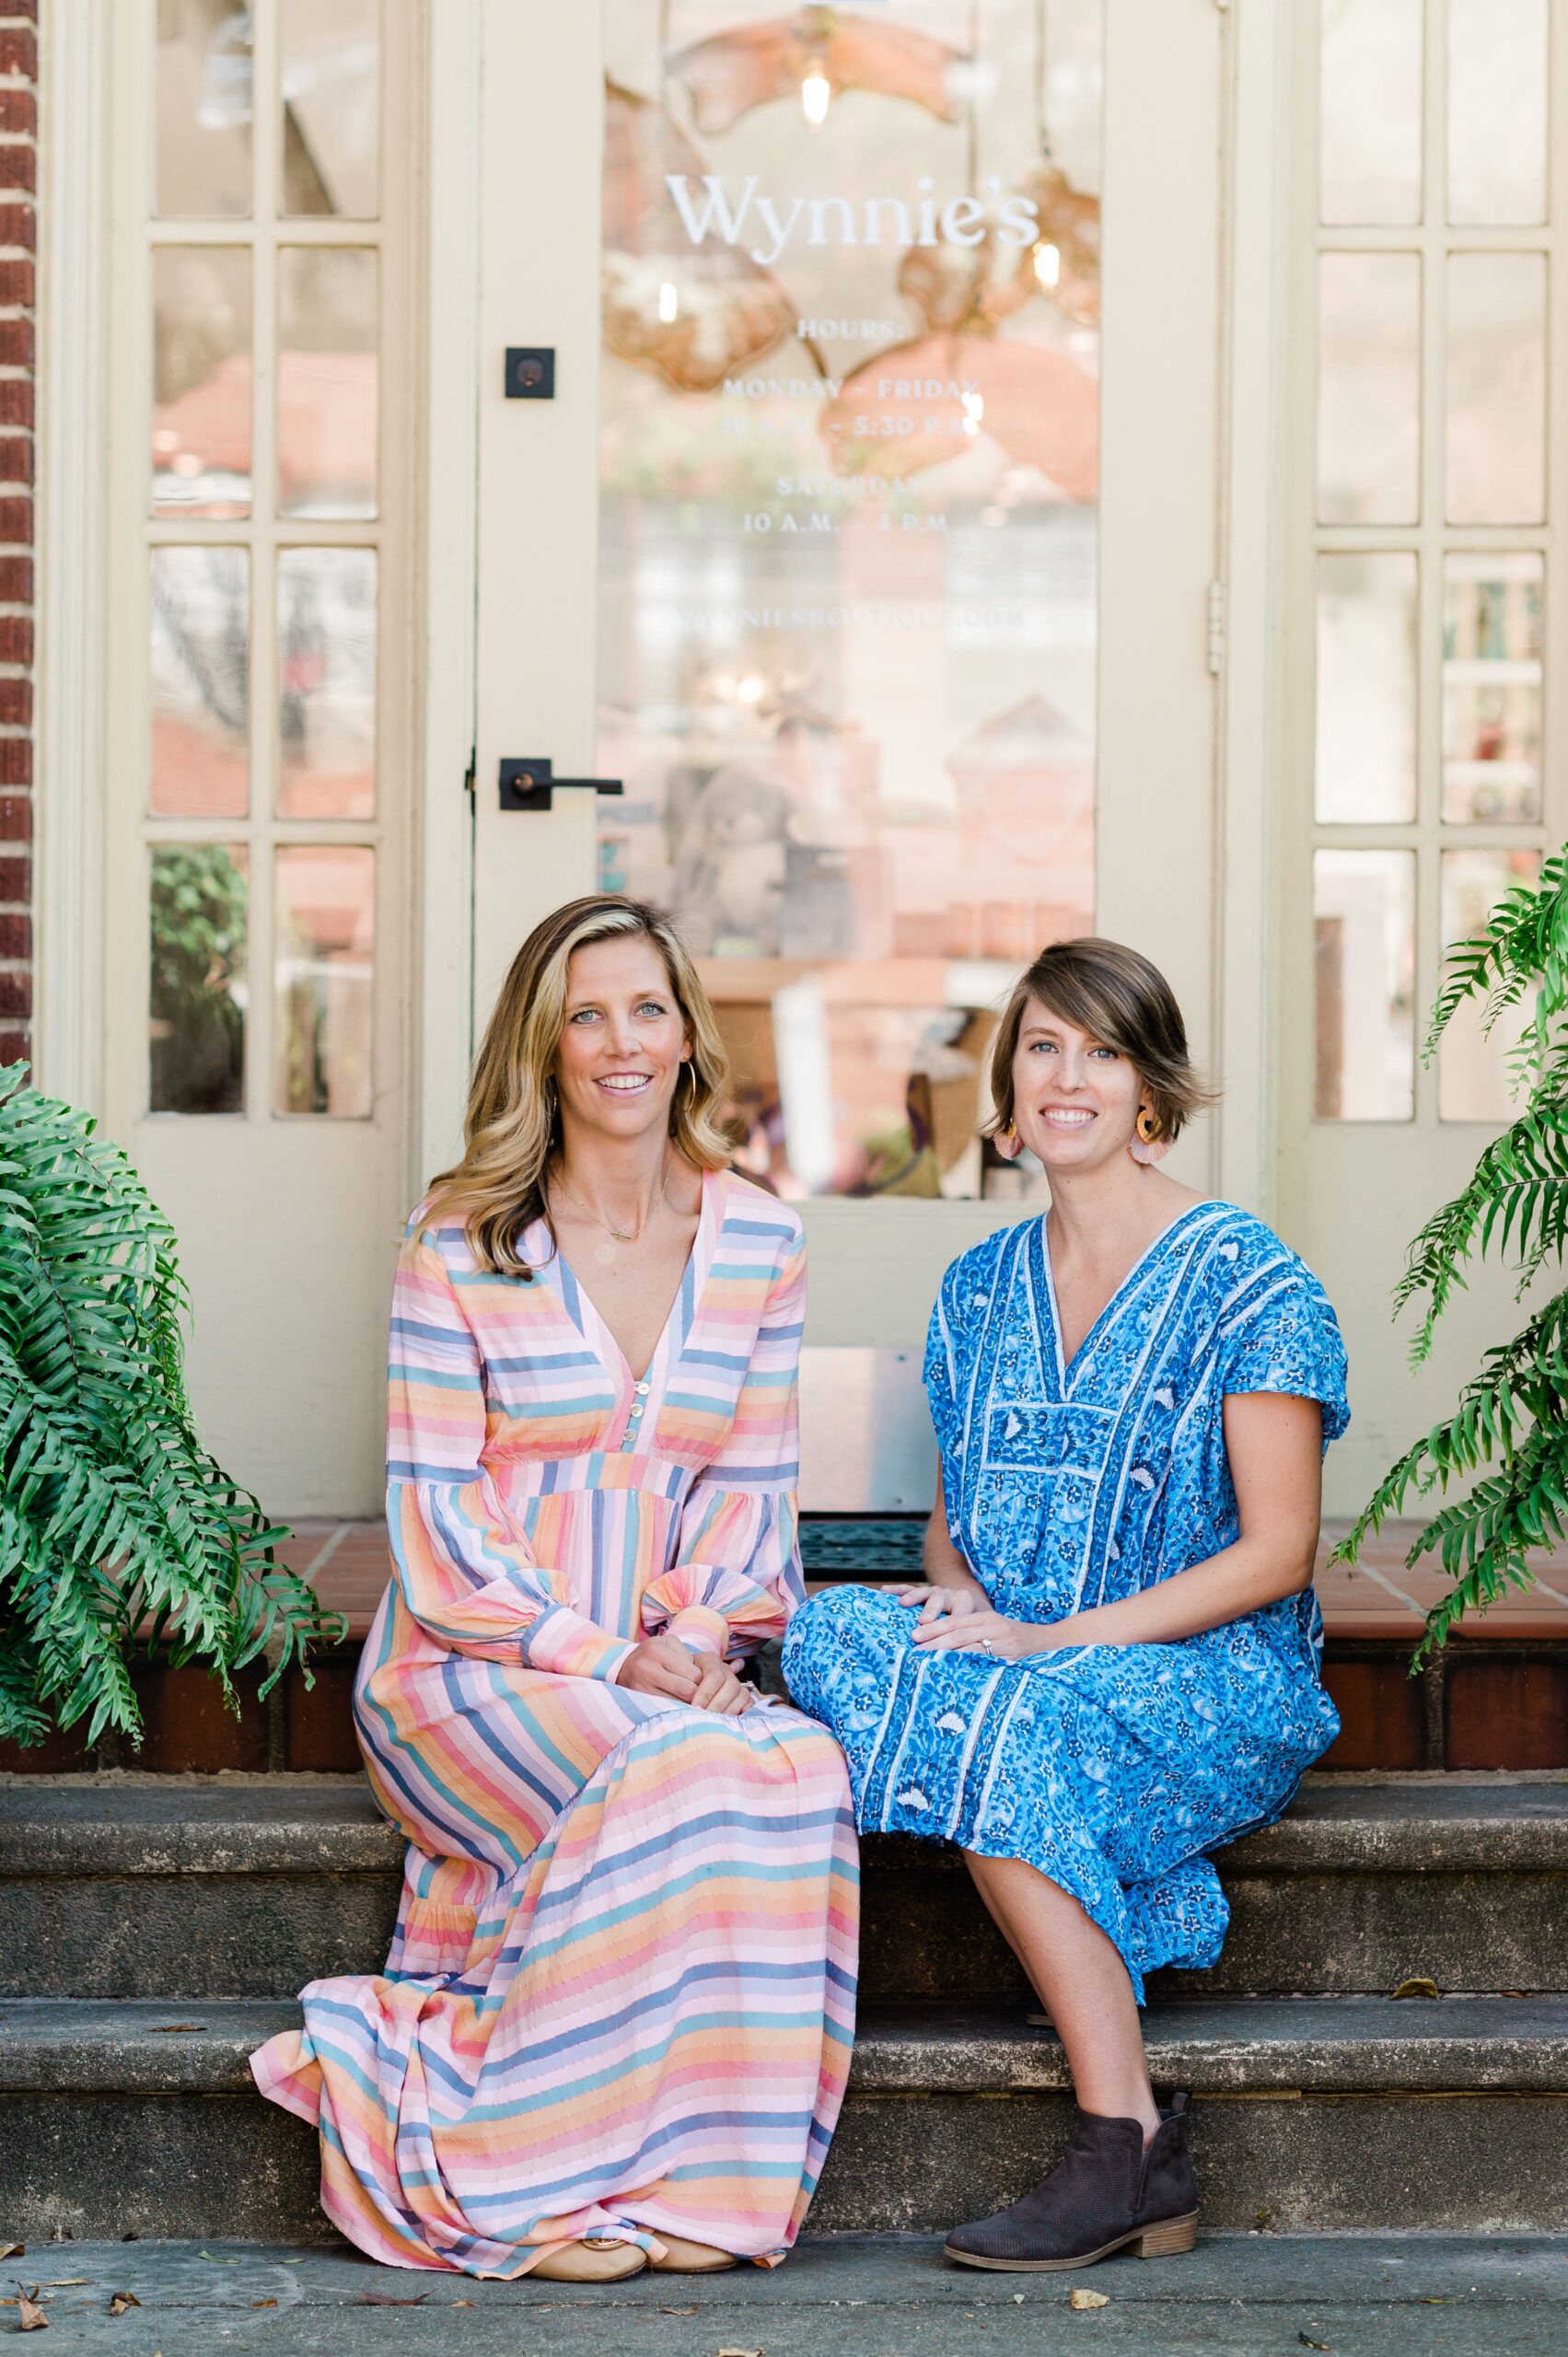 Two women sit side by side on the front steps of a boutique storefront, smiling at the camera.